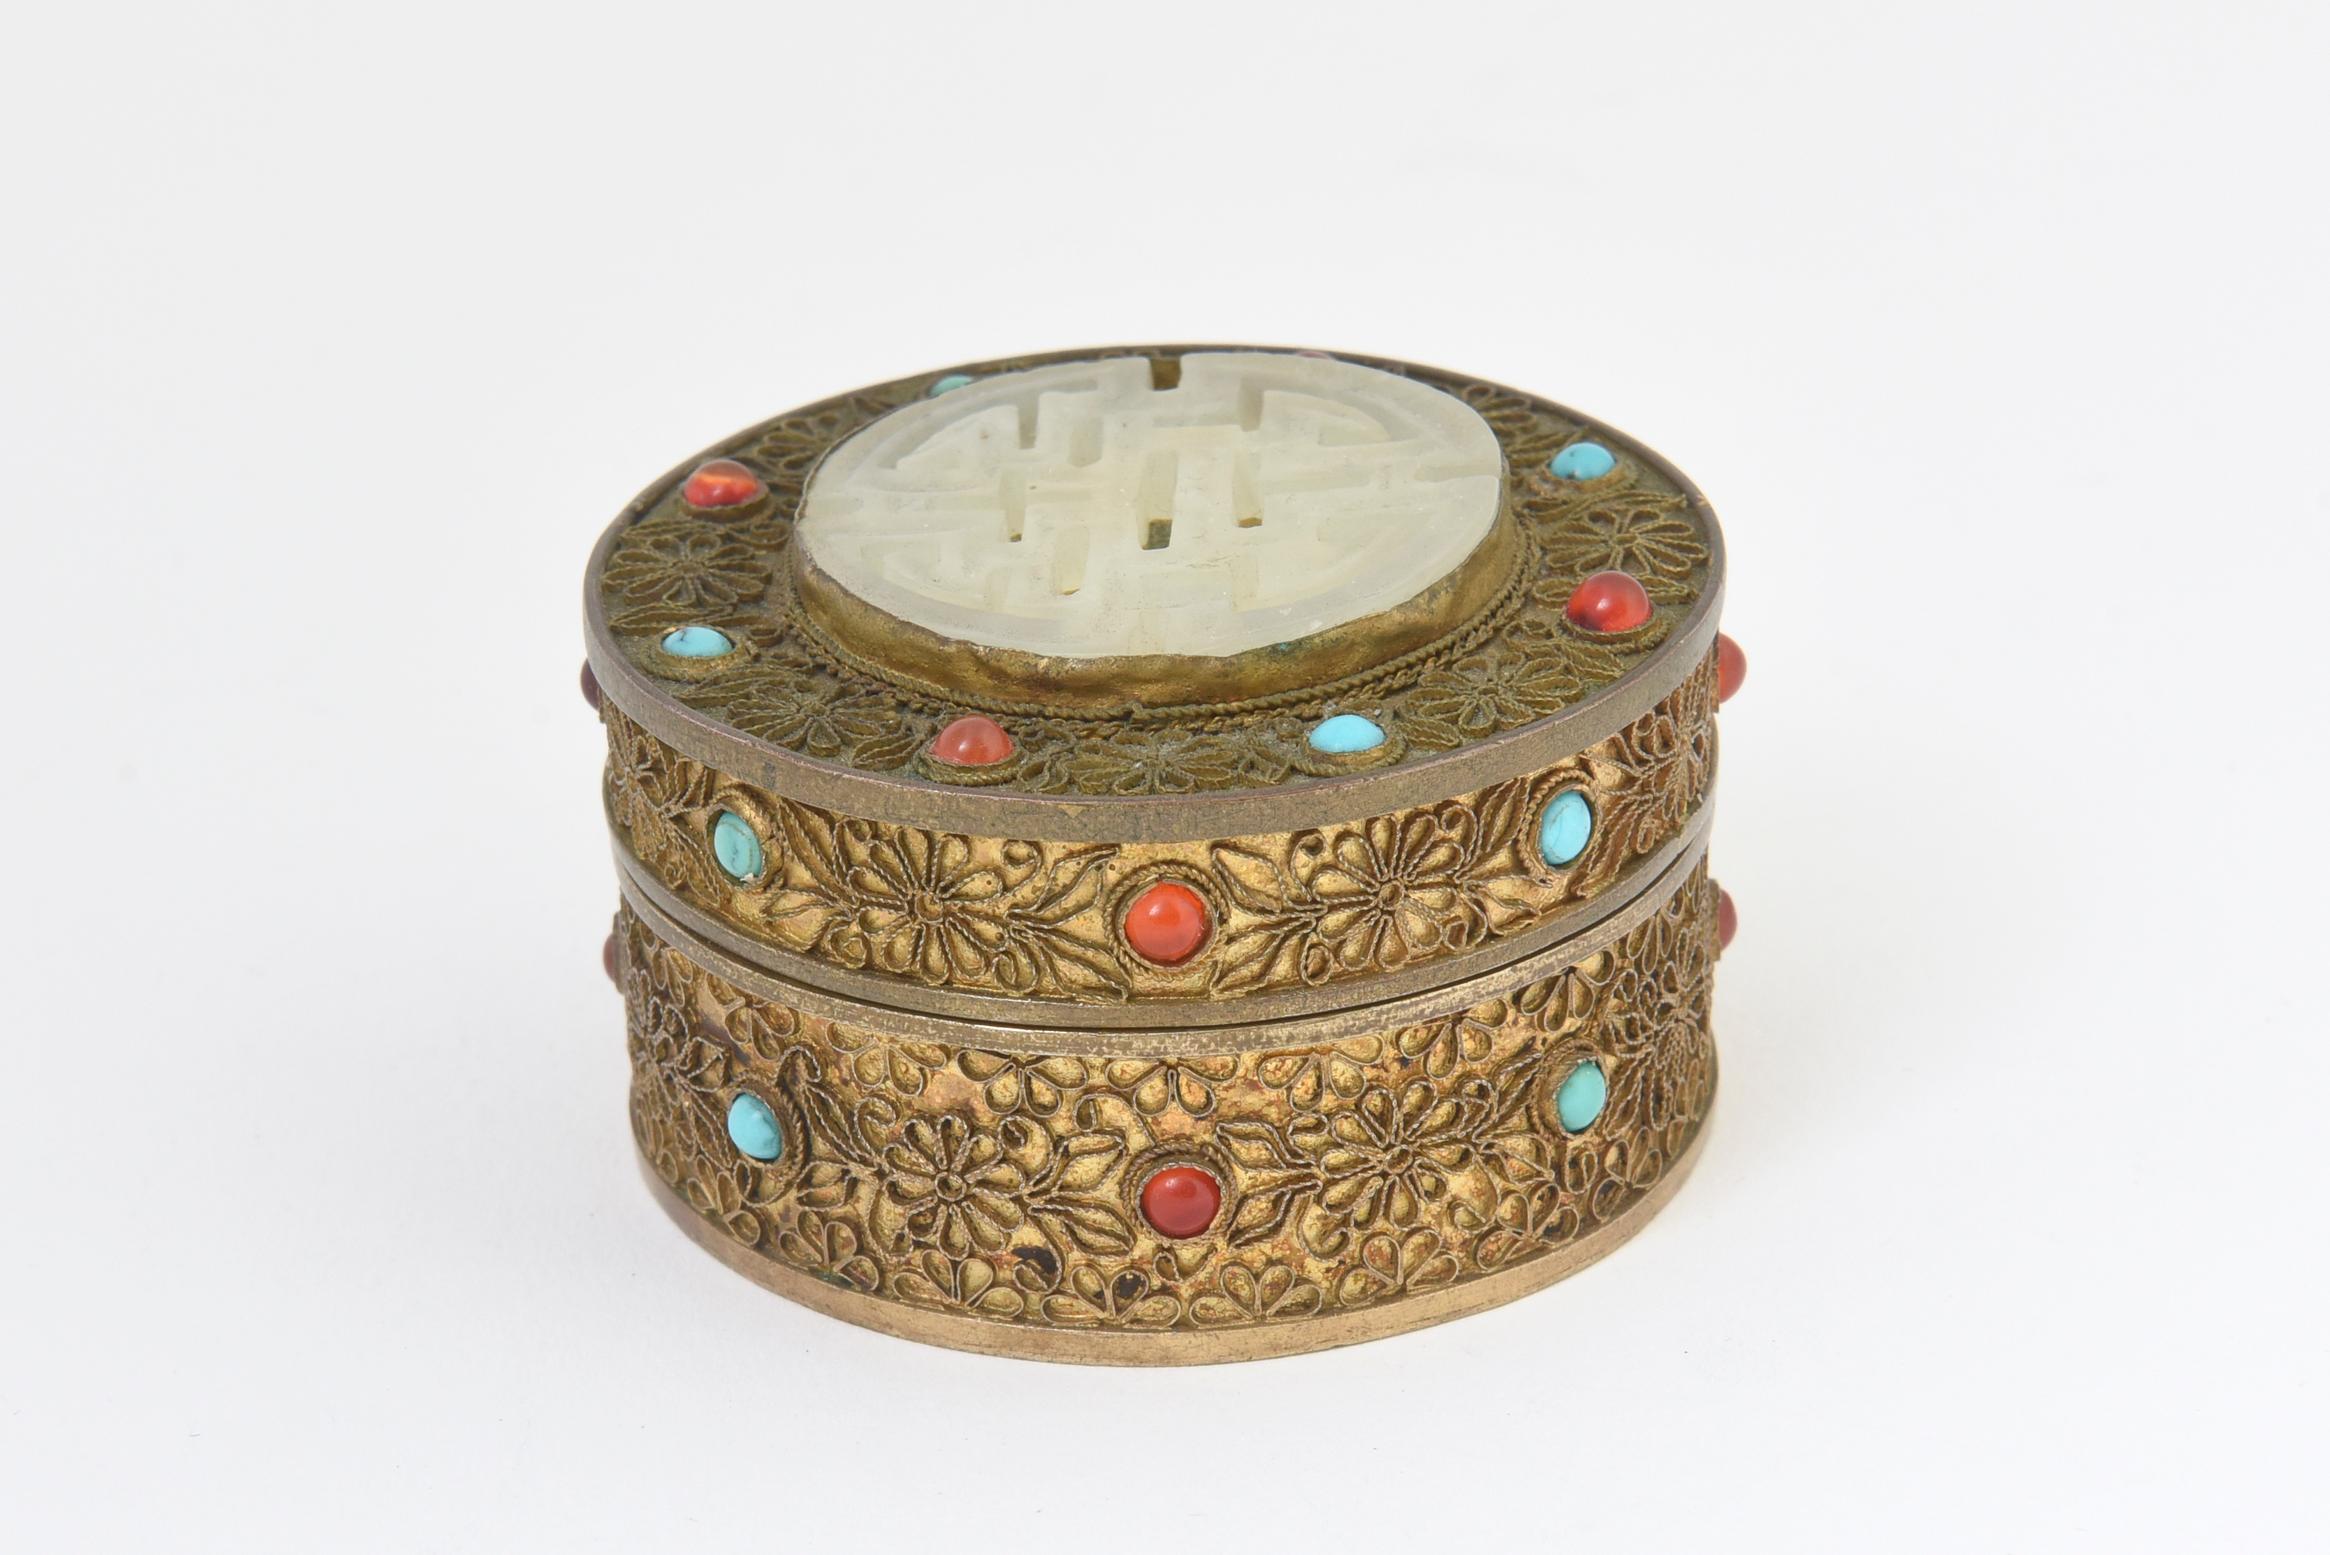 Asian gilt brass jewel box with carnelian and turquoise gemstones. Removable lid has carved Asian soapstone medallion on top. Age wear.